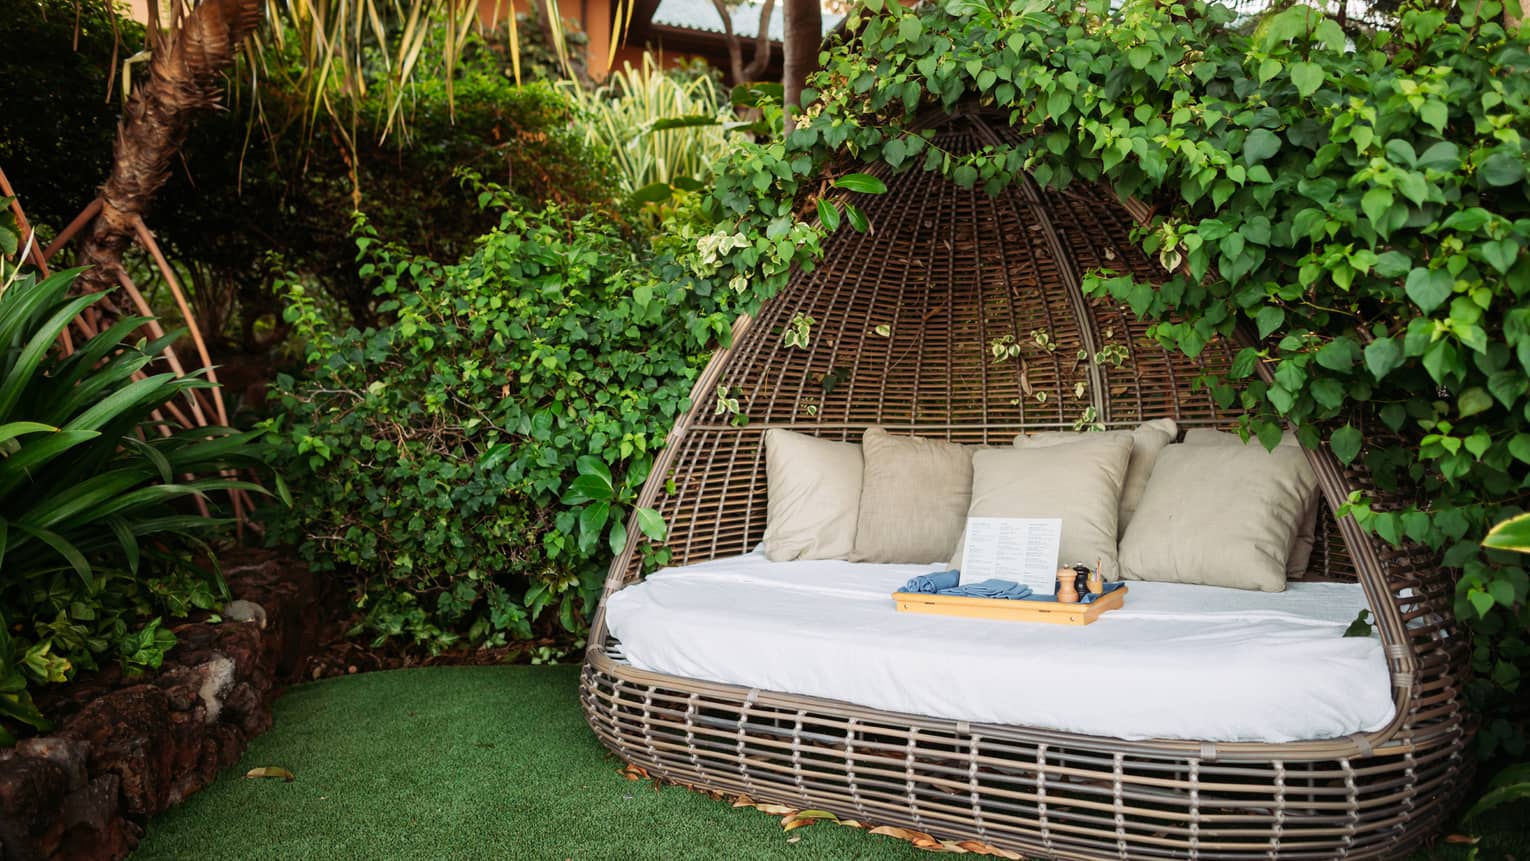 Covered daybed in garden setting